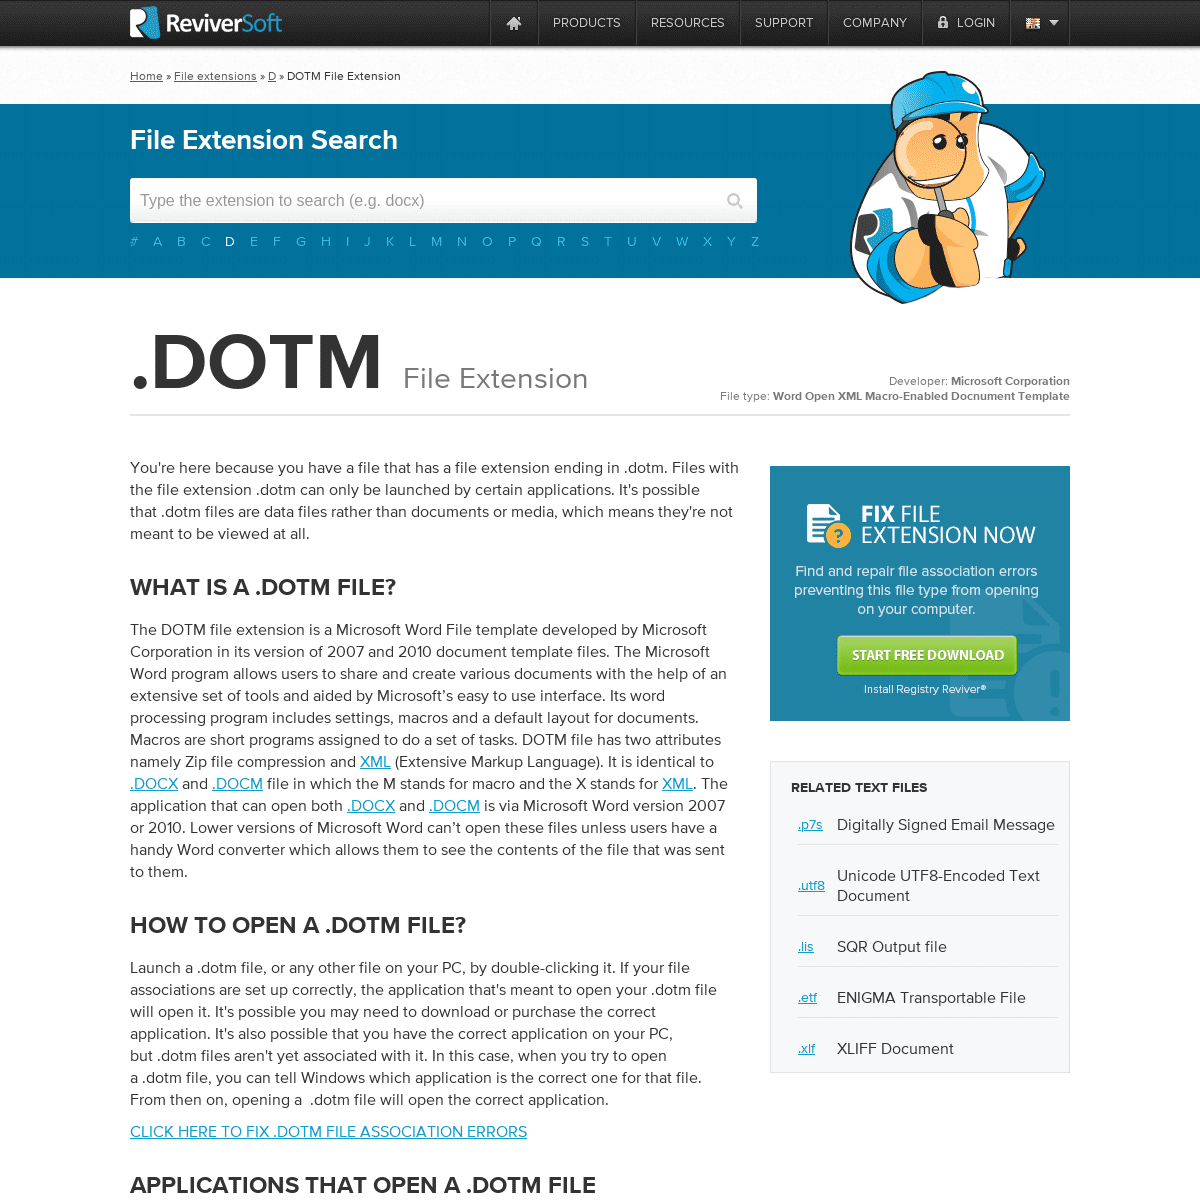 A complete backup of https://www.reviversoft.com/file-extensions/dotm